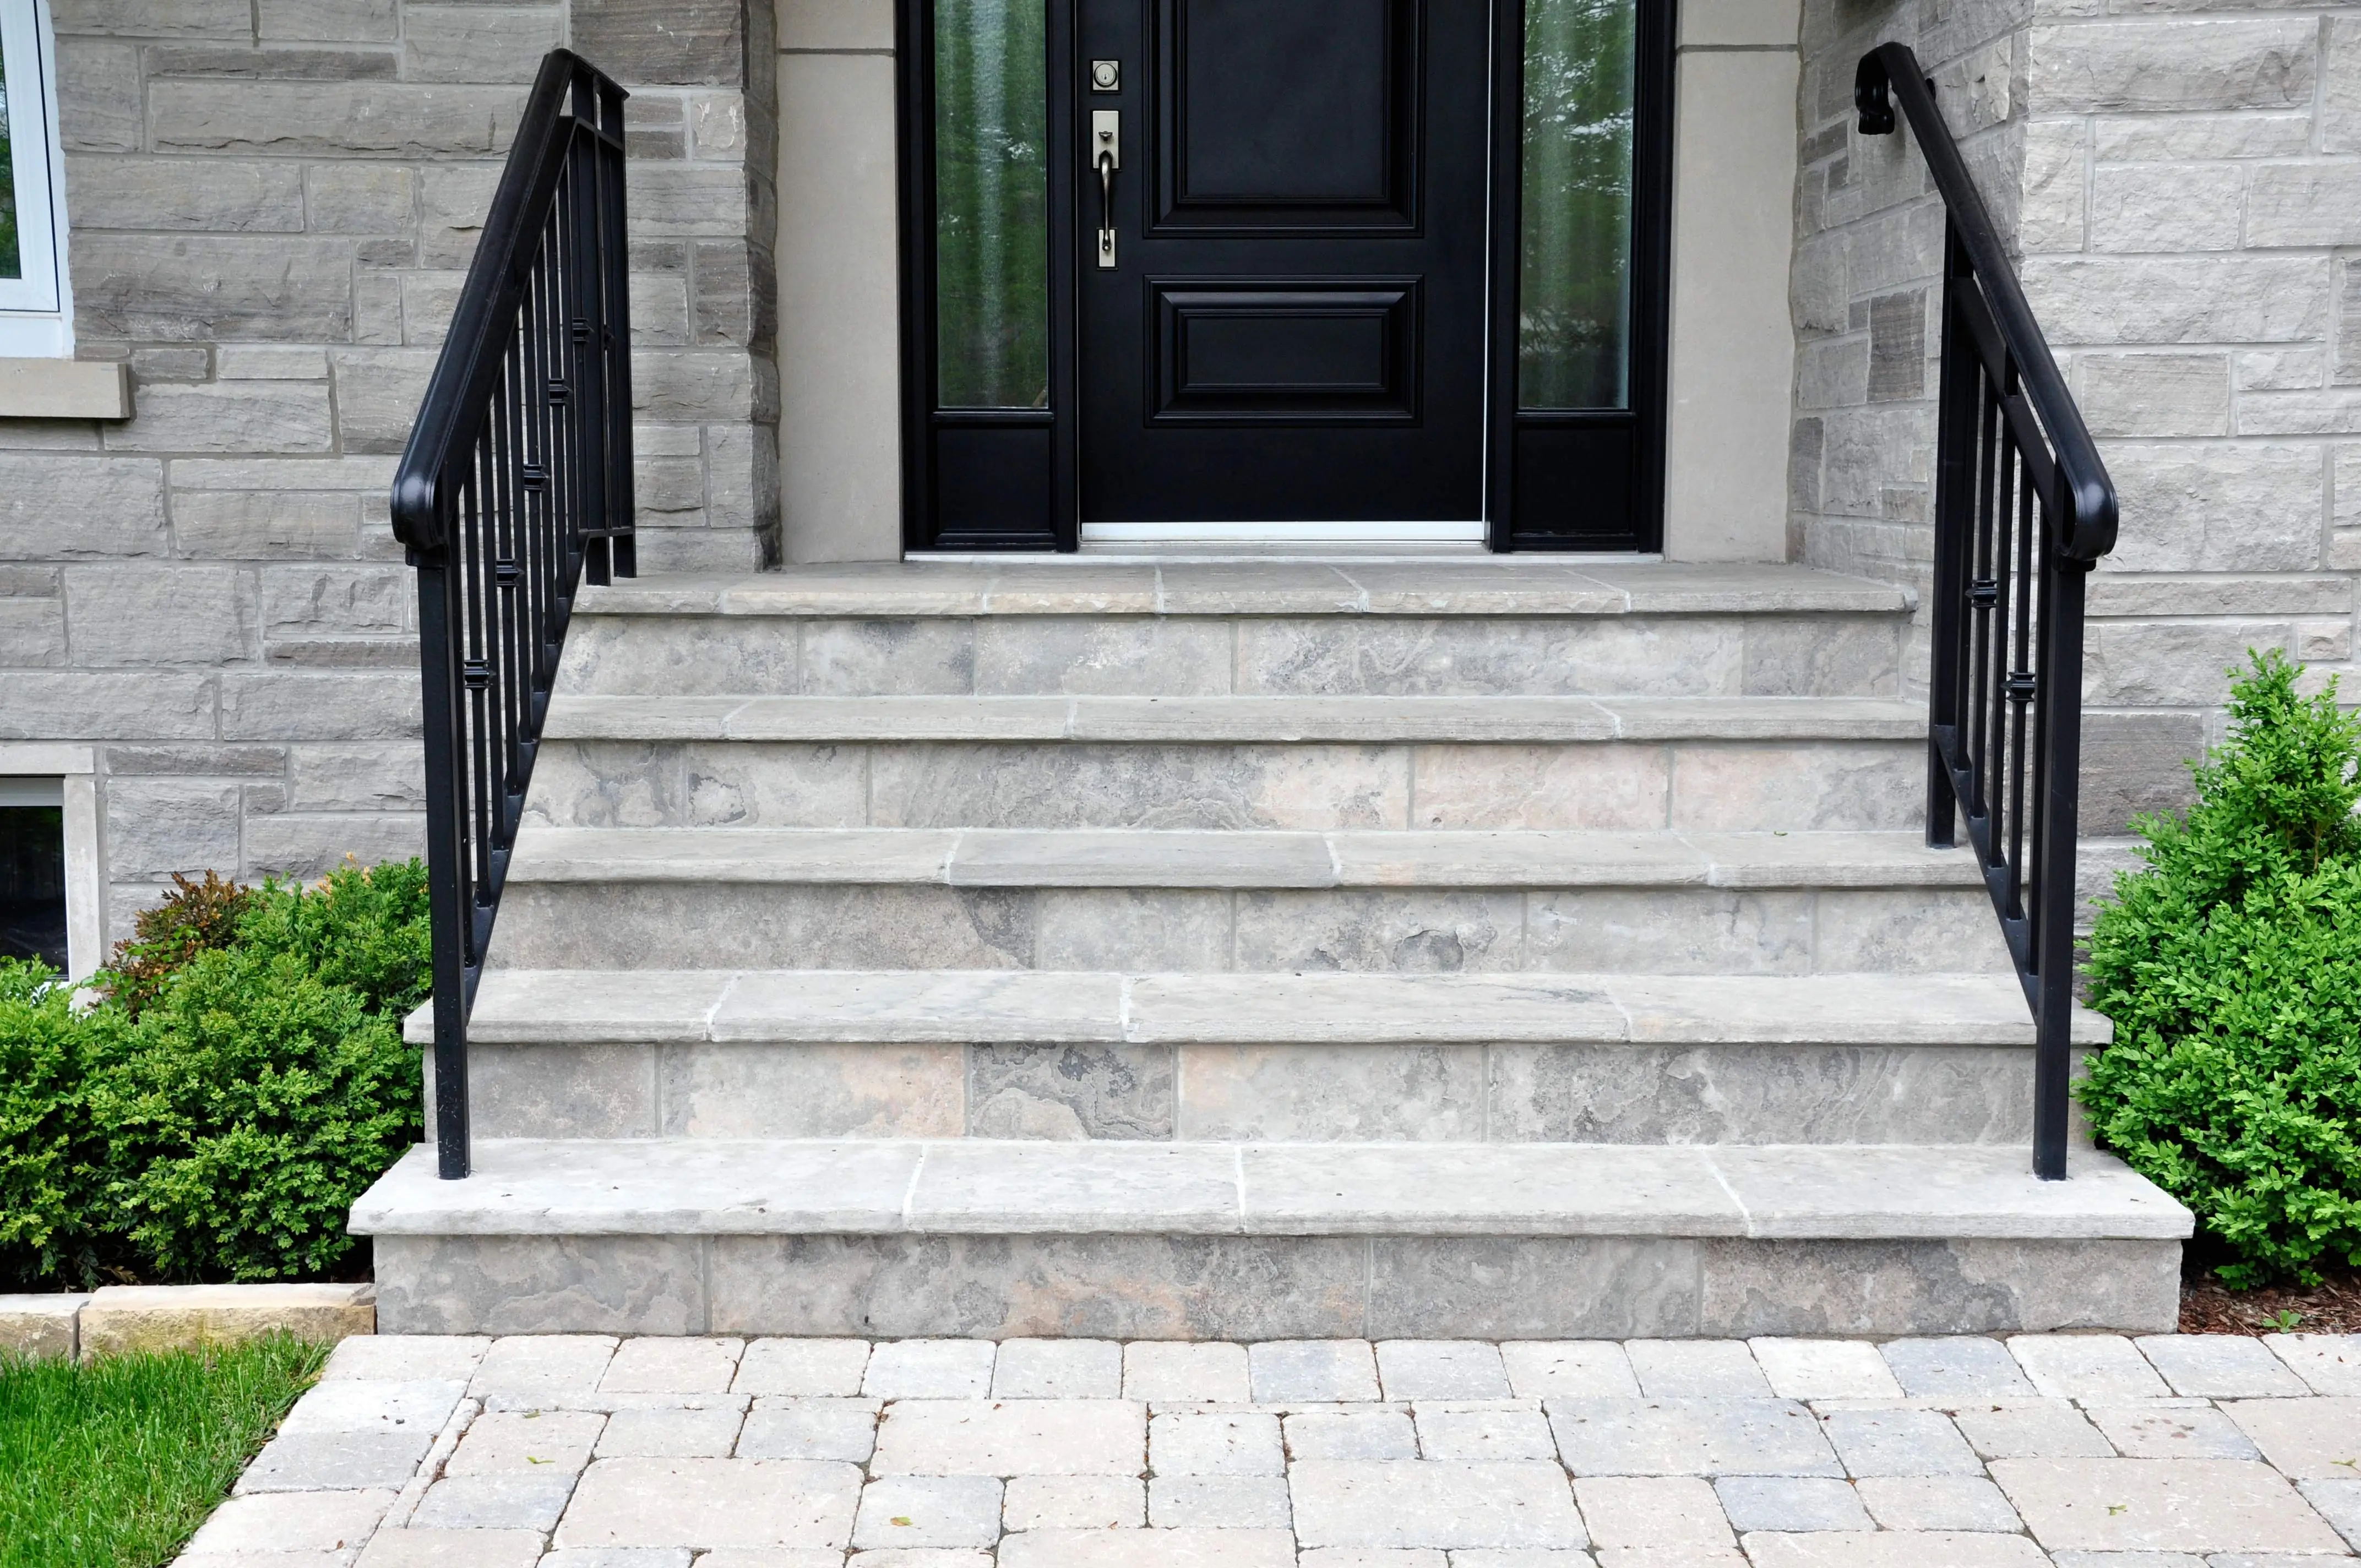 Elegant stone front steps with black metal railings crafted by Main Line Masonry Contractors, demonstrating quality workmanship and attention to detail